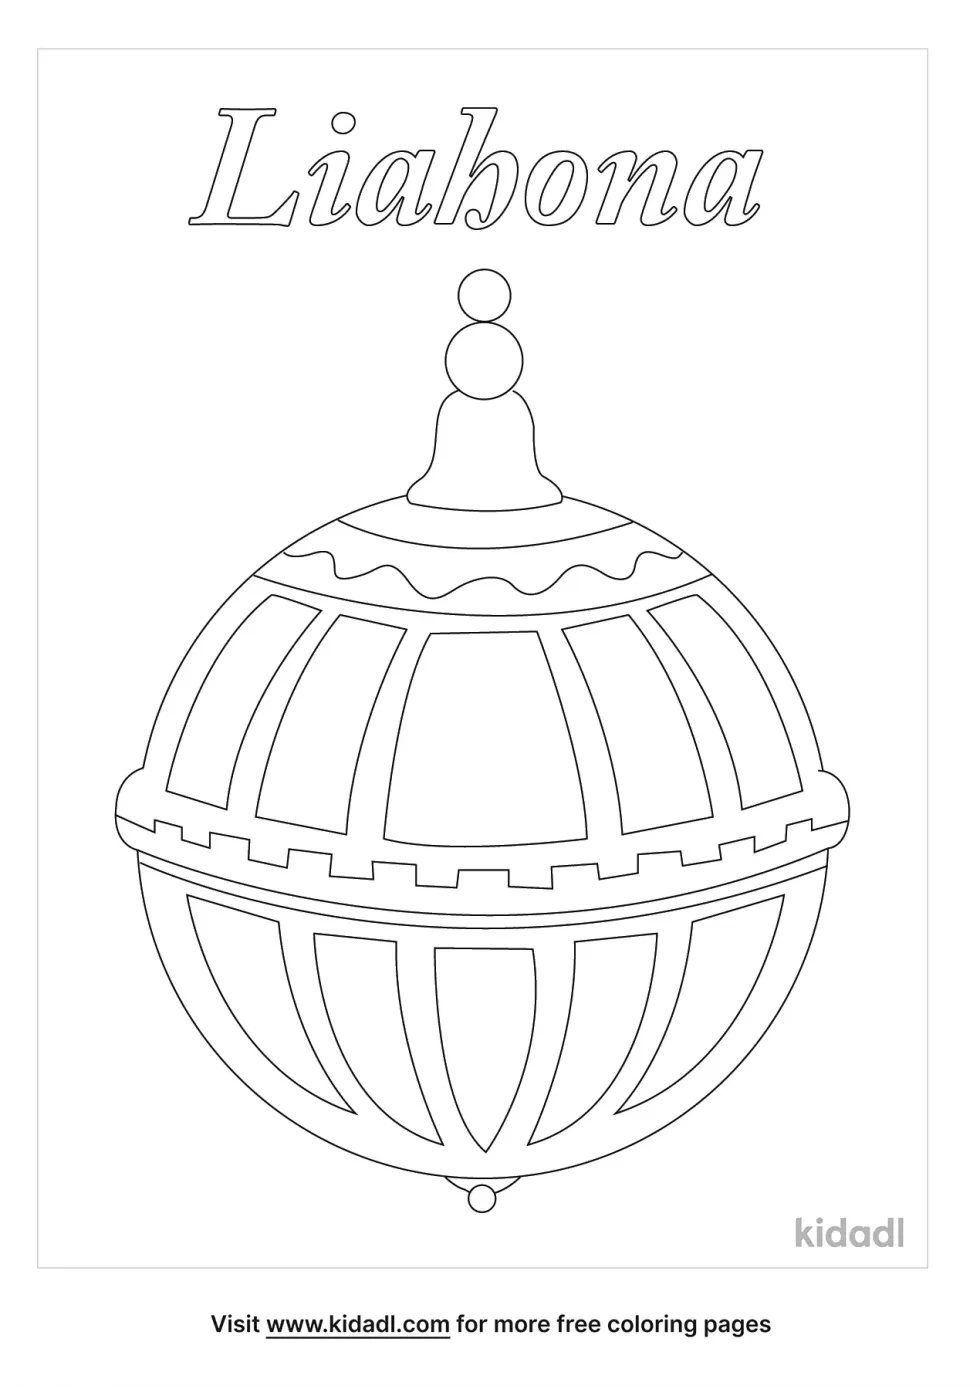 Liahona Coloring Page